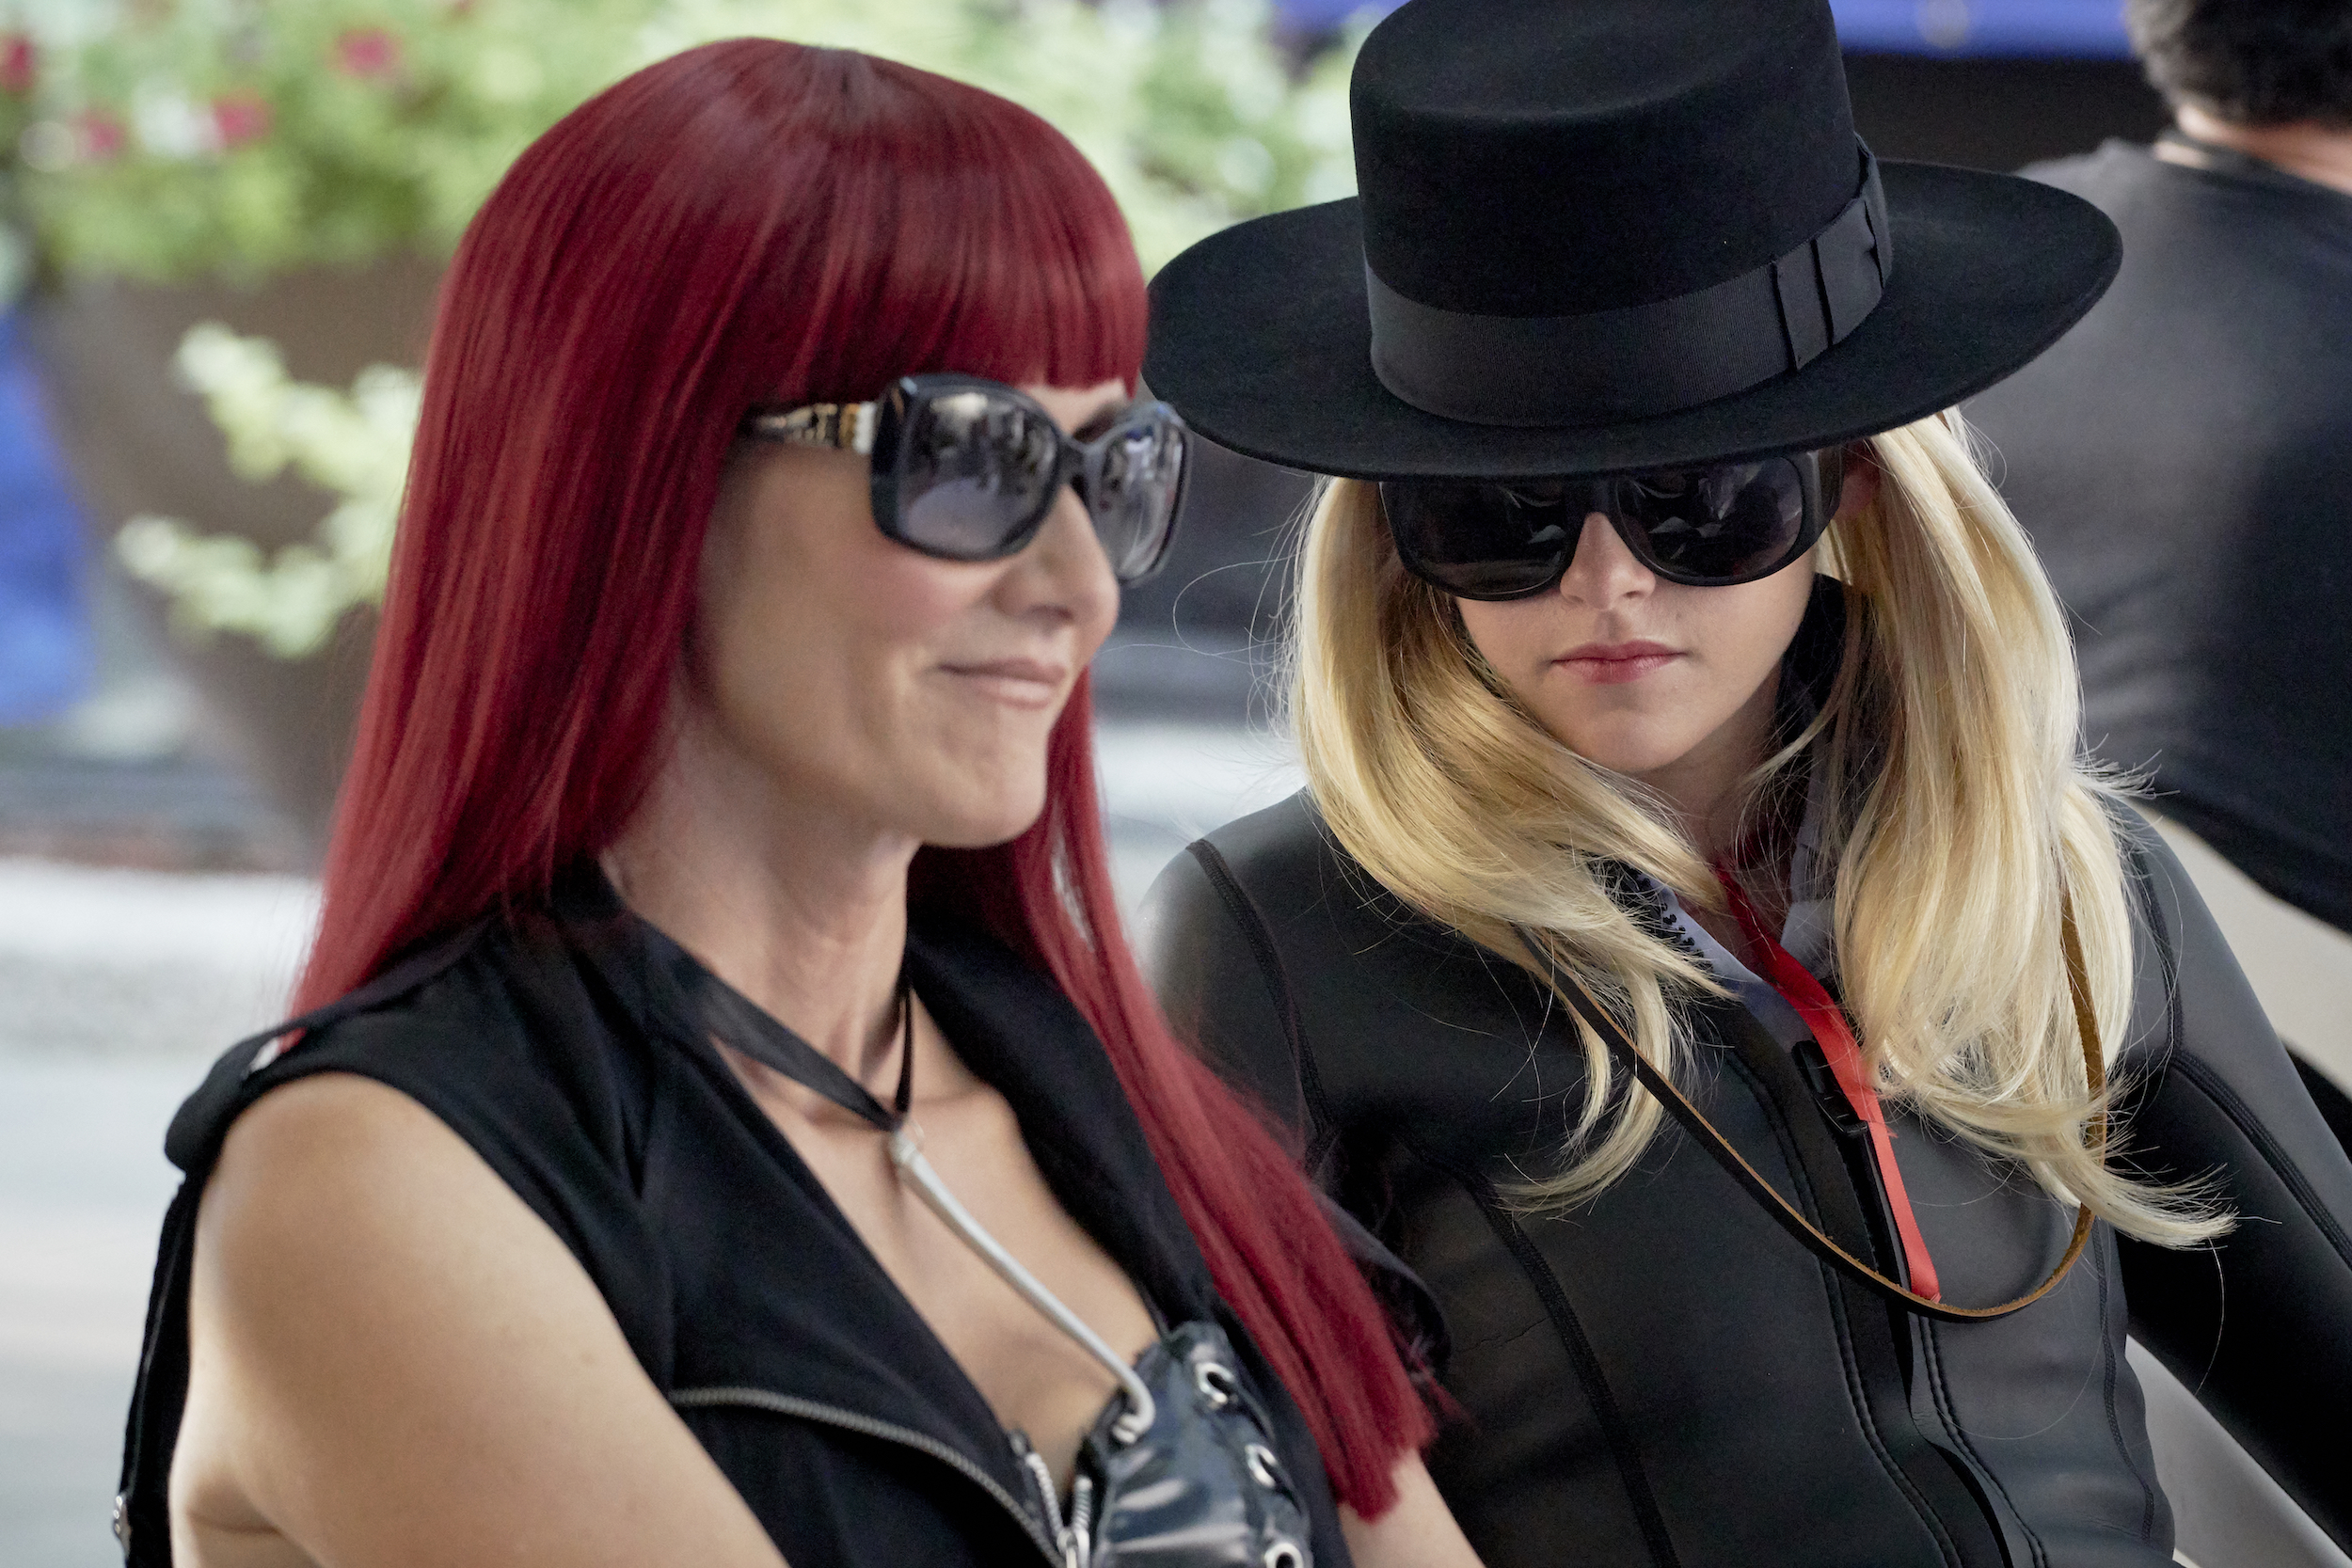  Laura Dern as Laura Albert and Kristen Stewart as Savannah Knoop in the film J.T. LEROY. Photo courtesy of Universal Pictures Content Group